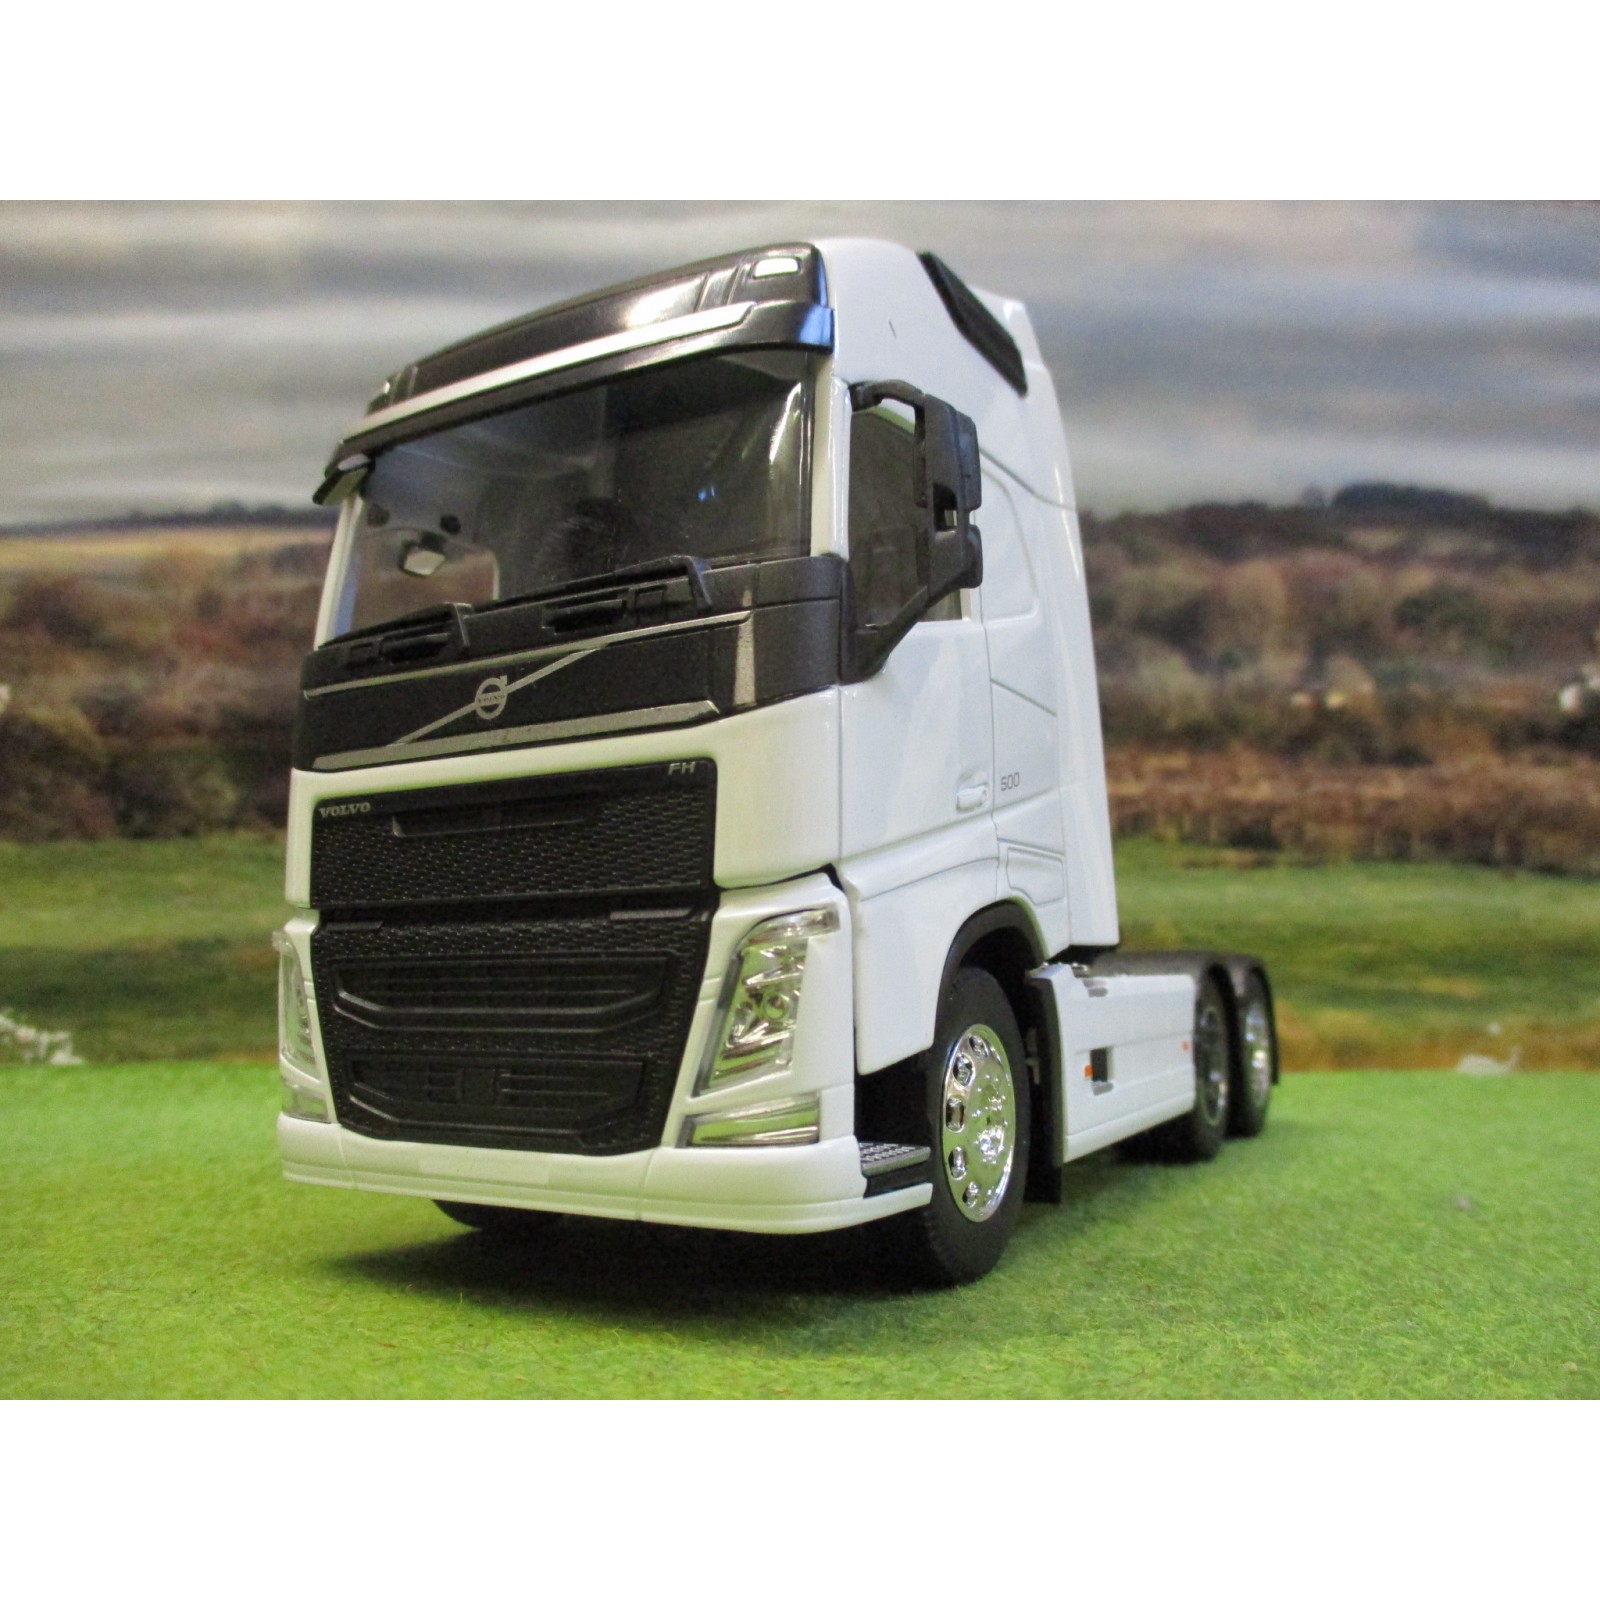 VOLVO FH12 MODEL TRUCK LORRY CAB UNIT WHITE LARGE 1:32 SCALE WAGON 4X4 WELLY K8